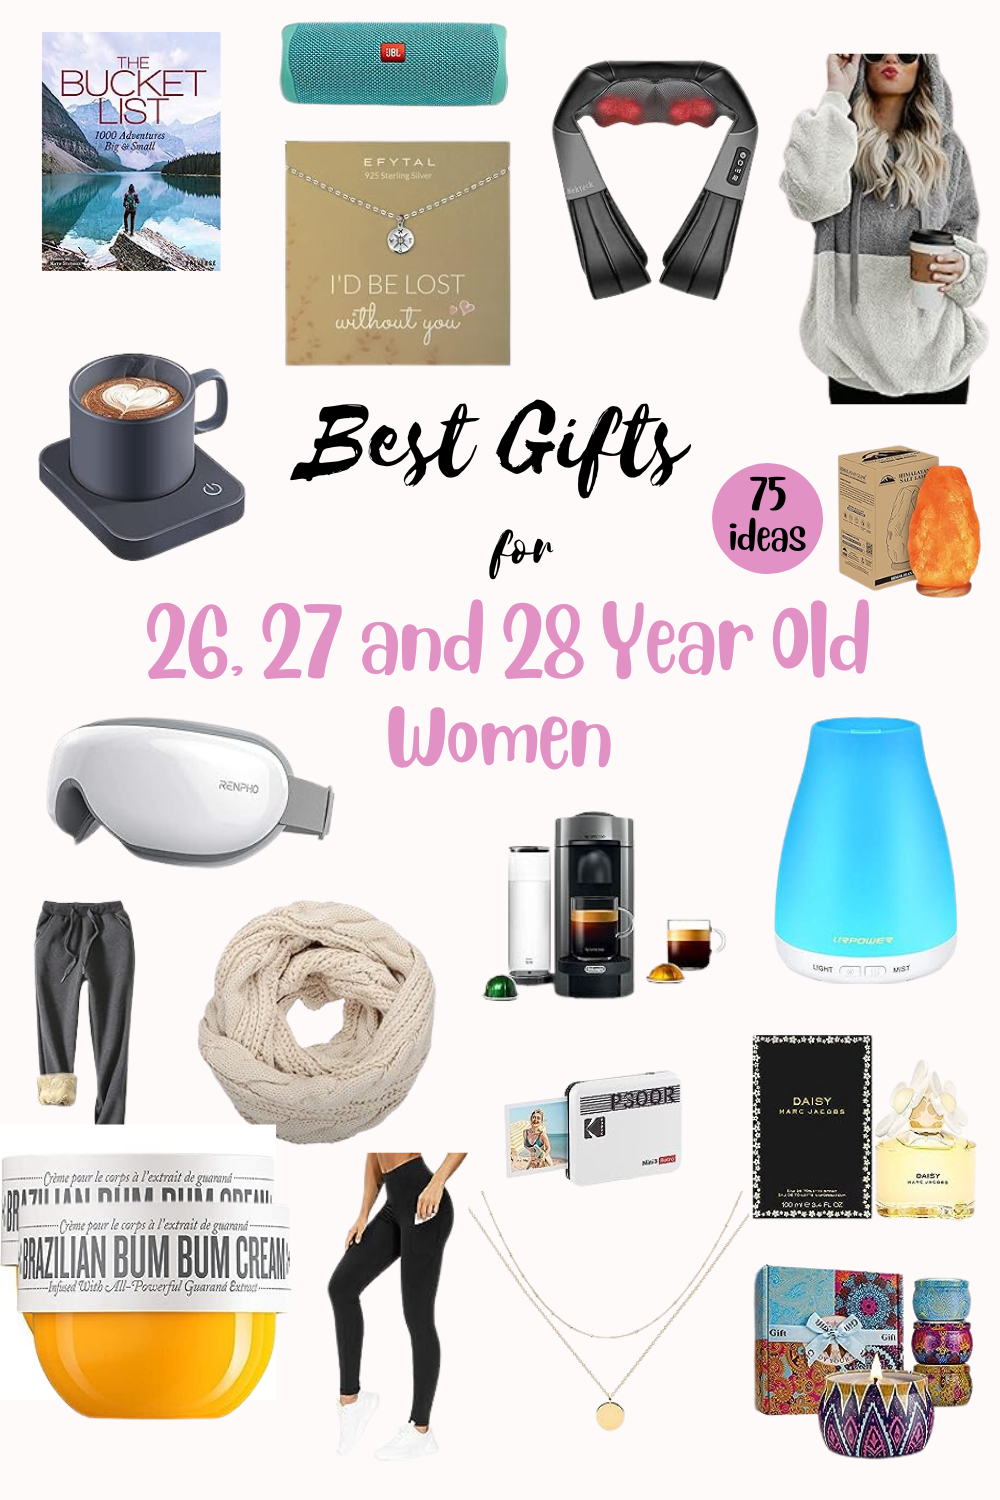 37+ Handmade Gift Ideas For Mom That She's Guaranteed To Love-gemektower.com.vn